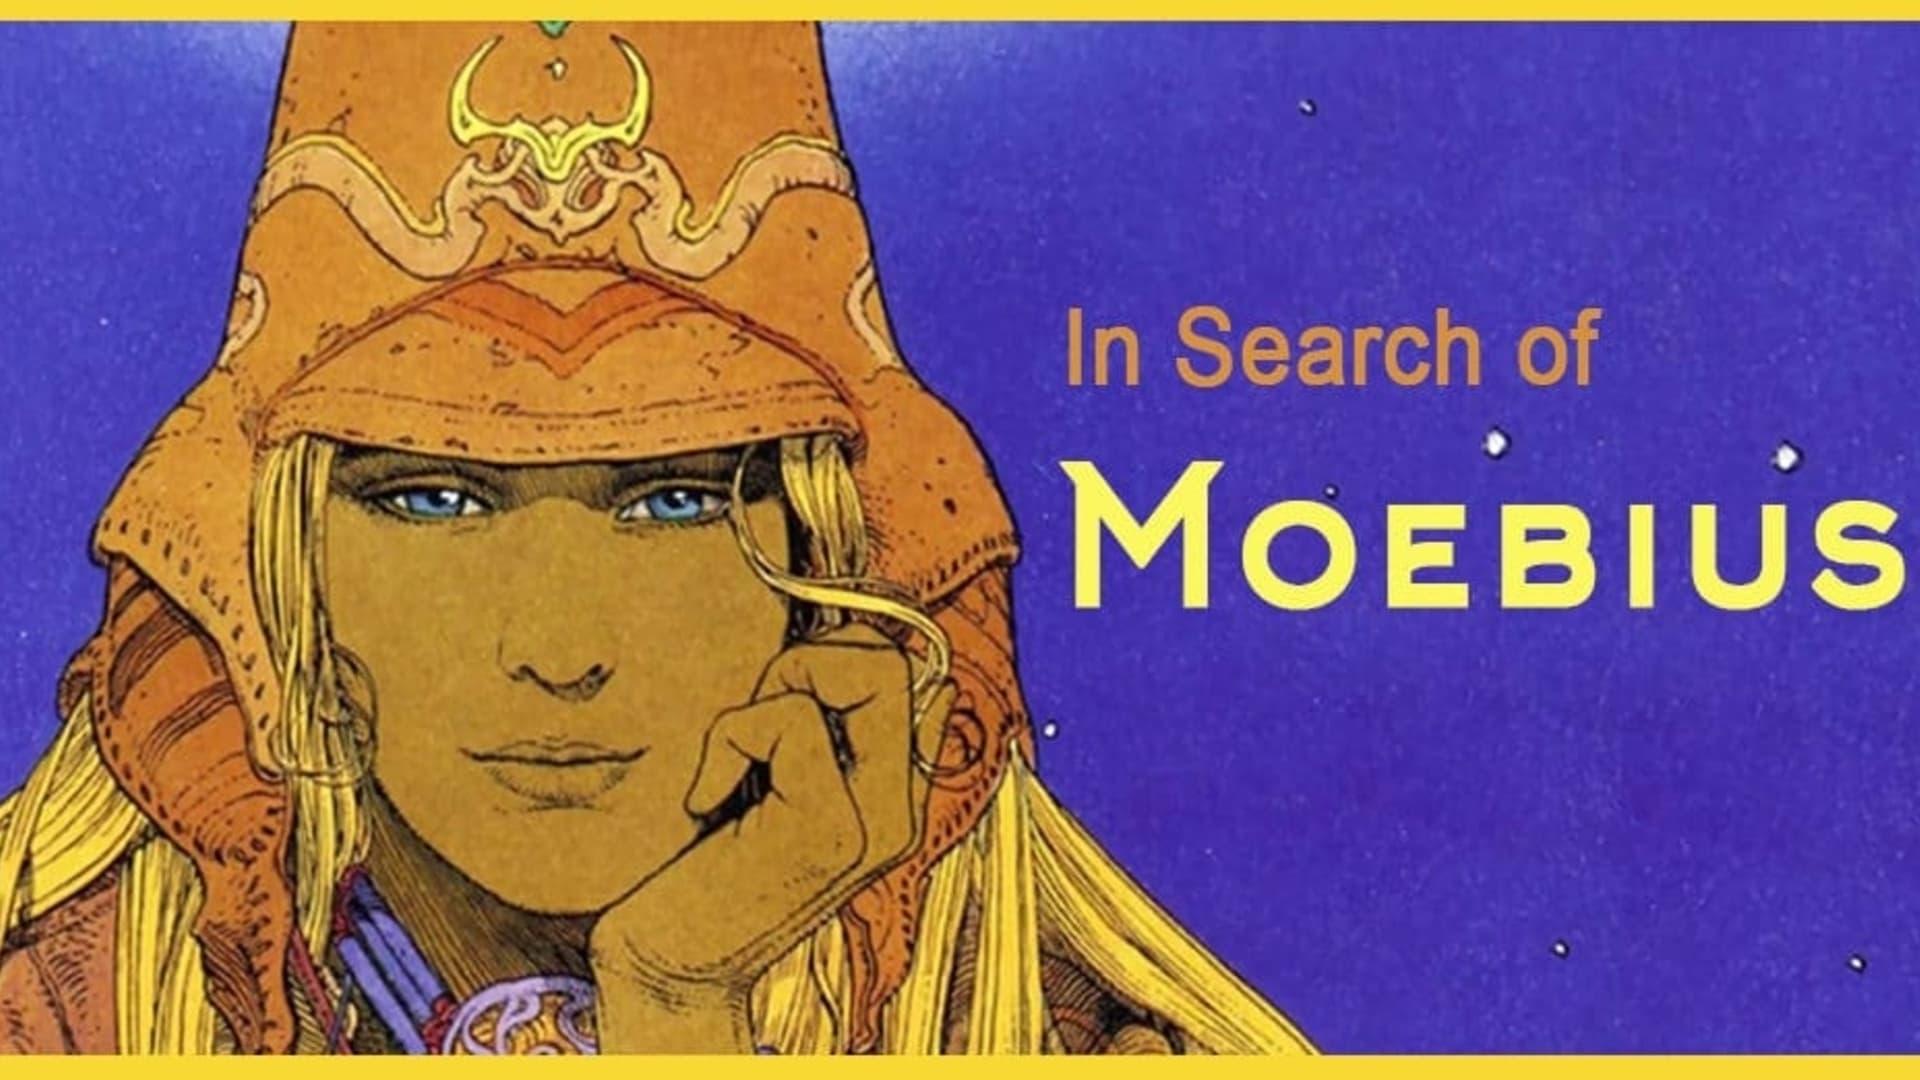 In Search of Moebius backdrop